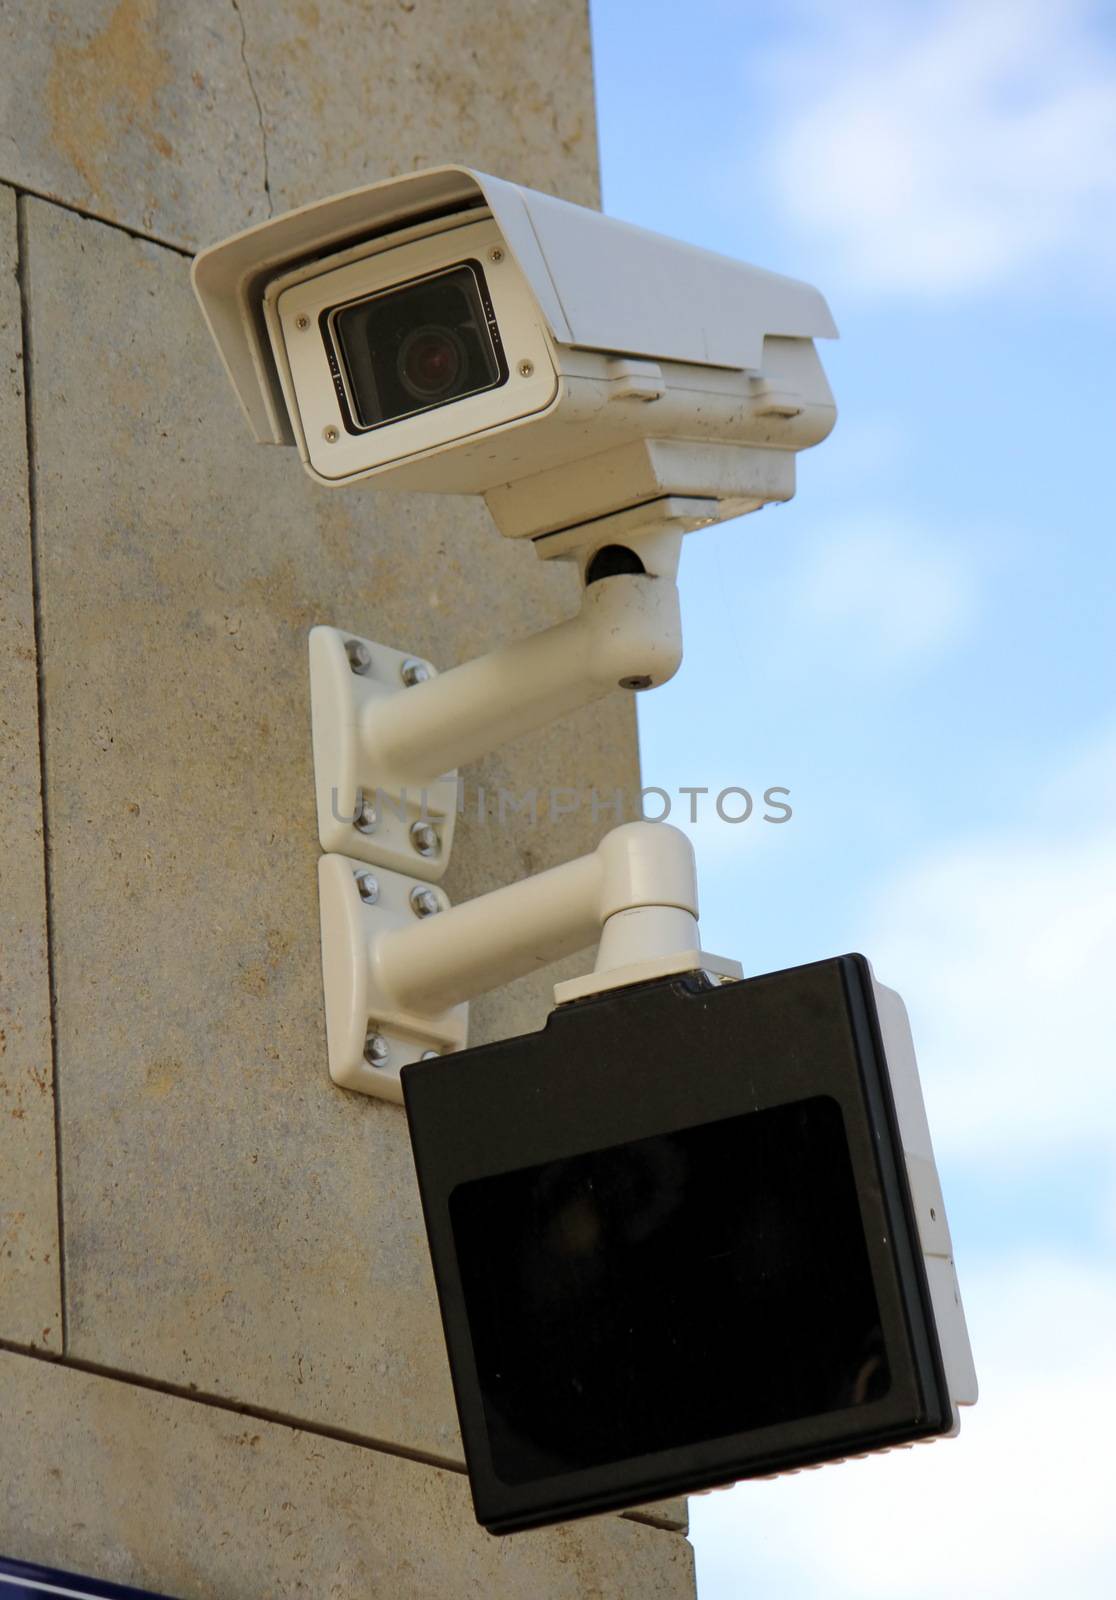 Security camera and screen under by Elenaphotos21